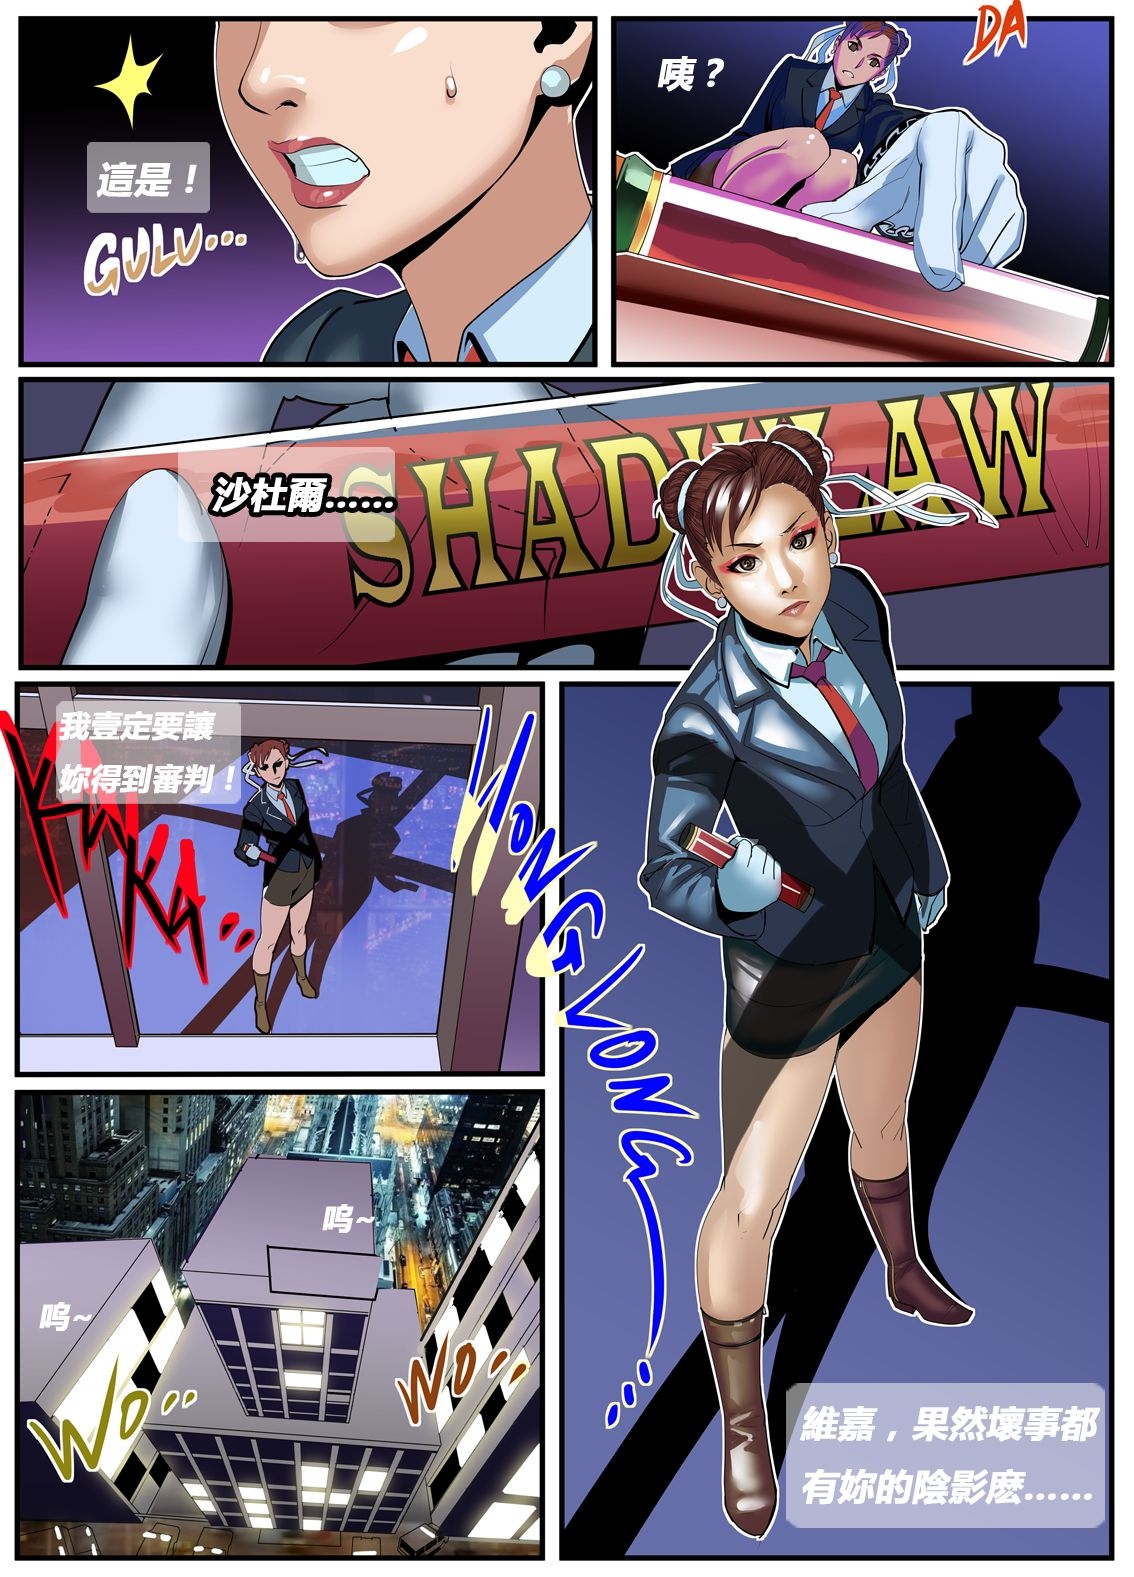 [chunlieater] The Lust of Mai Shiranui (King of Fighters) [Chinese] 60